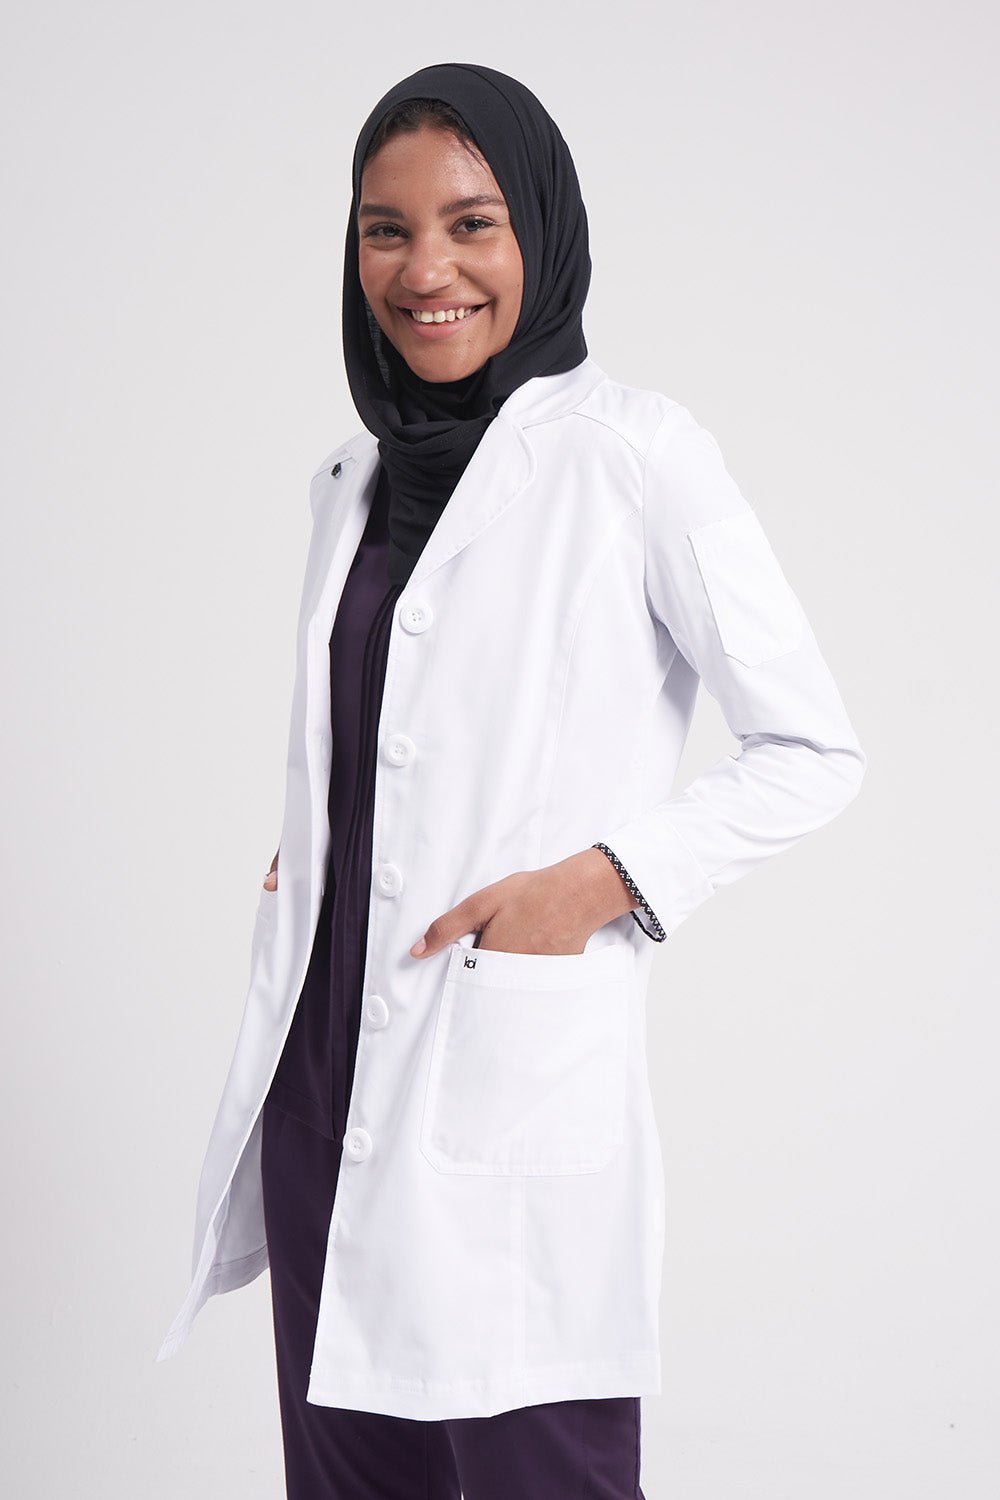 Her Every Day Labcoat